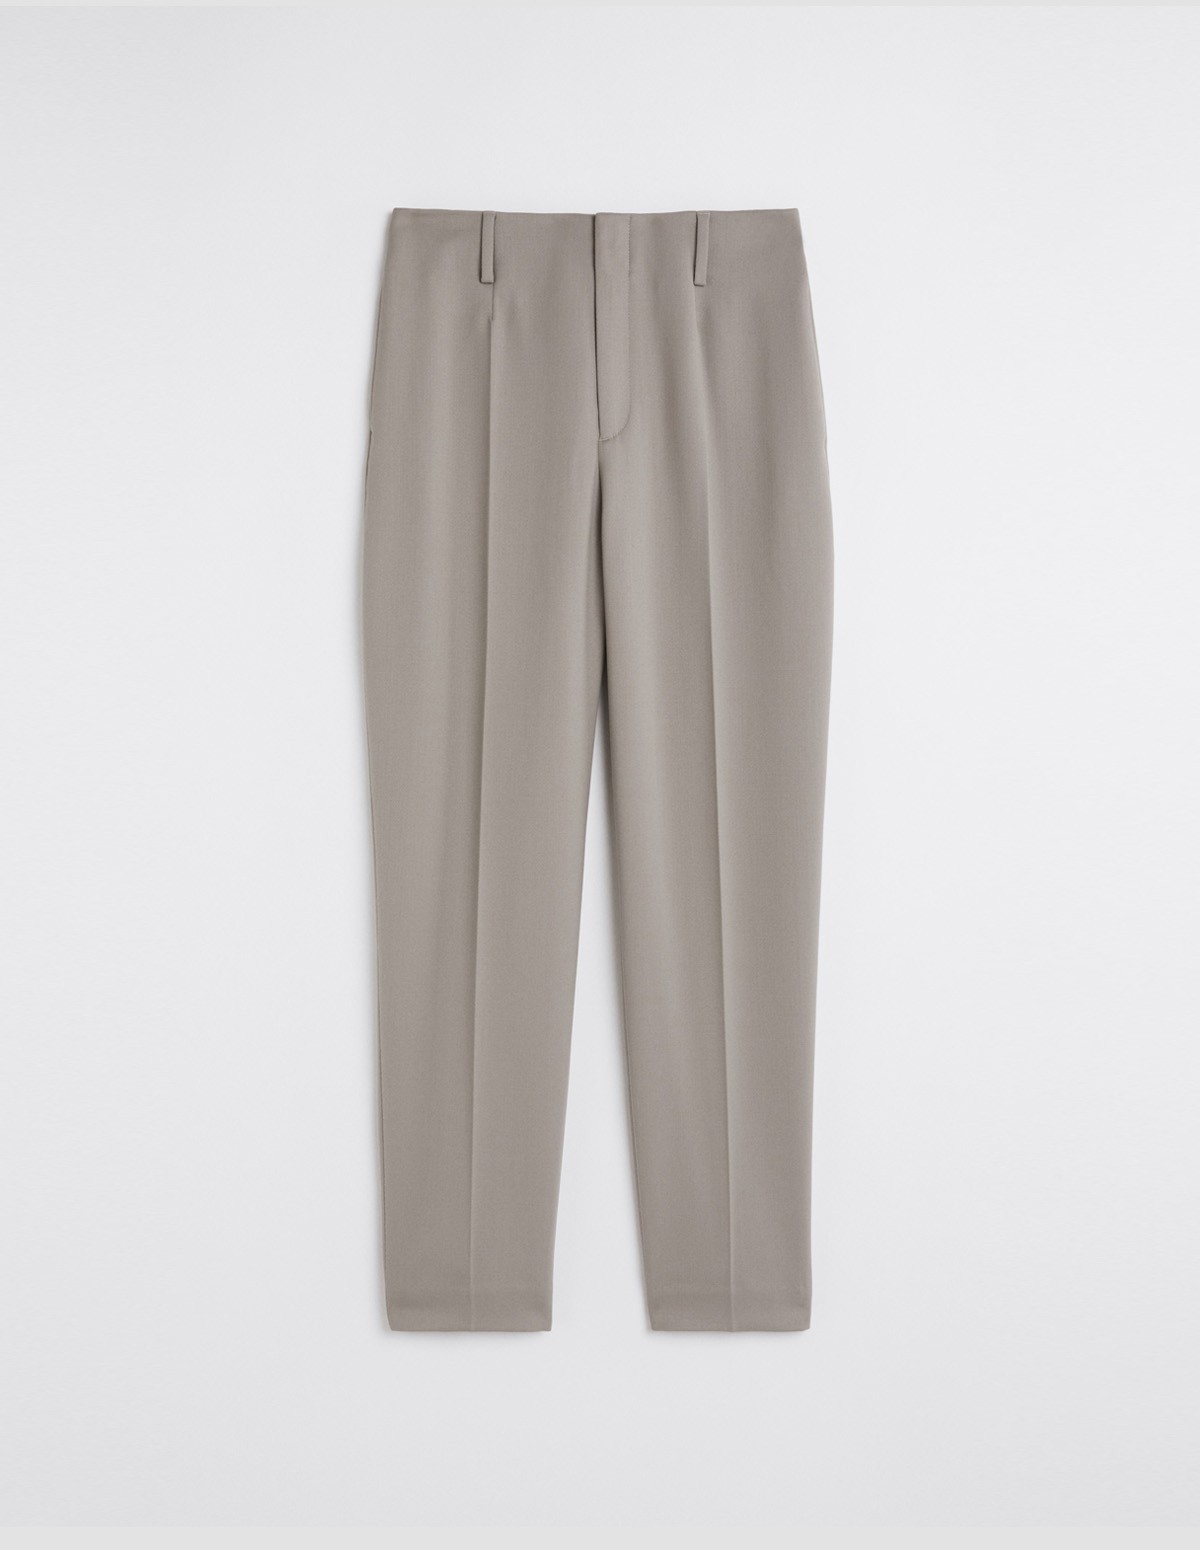 Karlie Trousers - LIGHT TAUPE